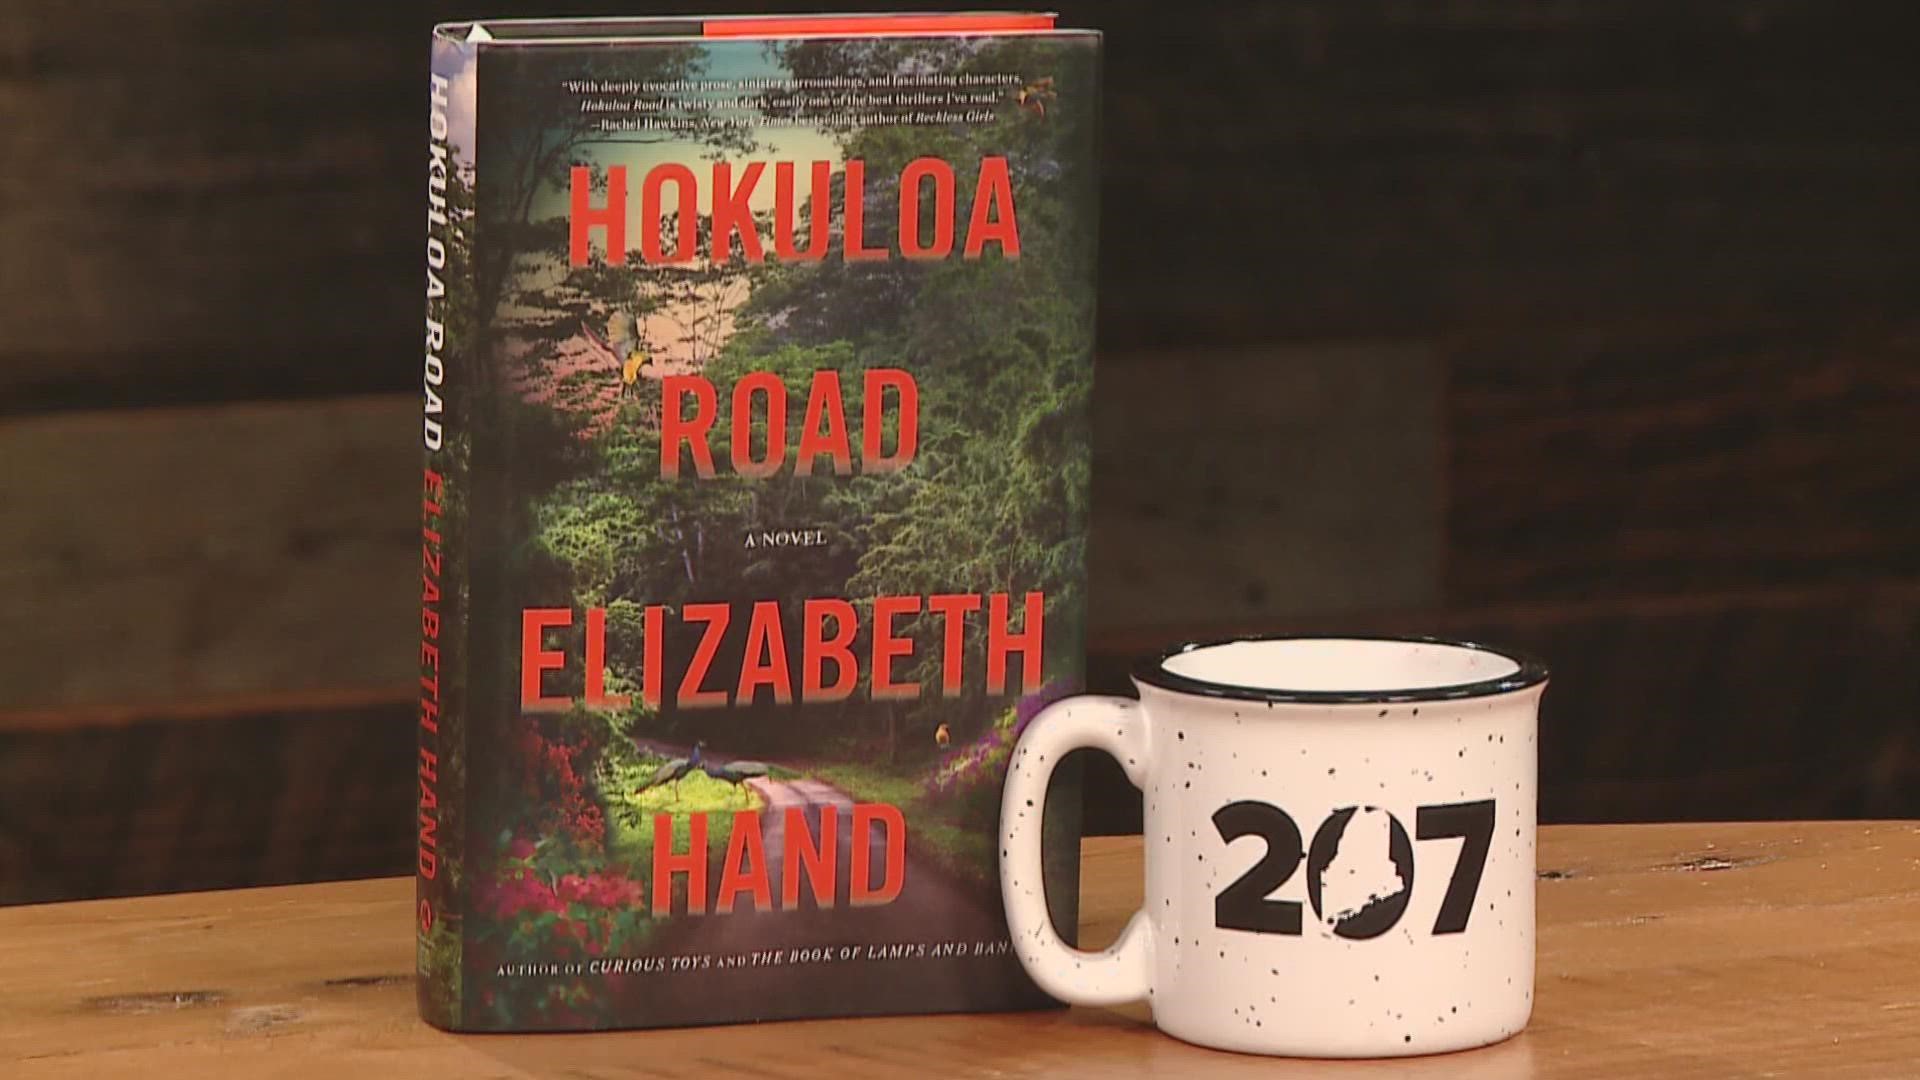 Elizabeth Hand was inspired by Hawaii—but she wouldn’t want to live there